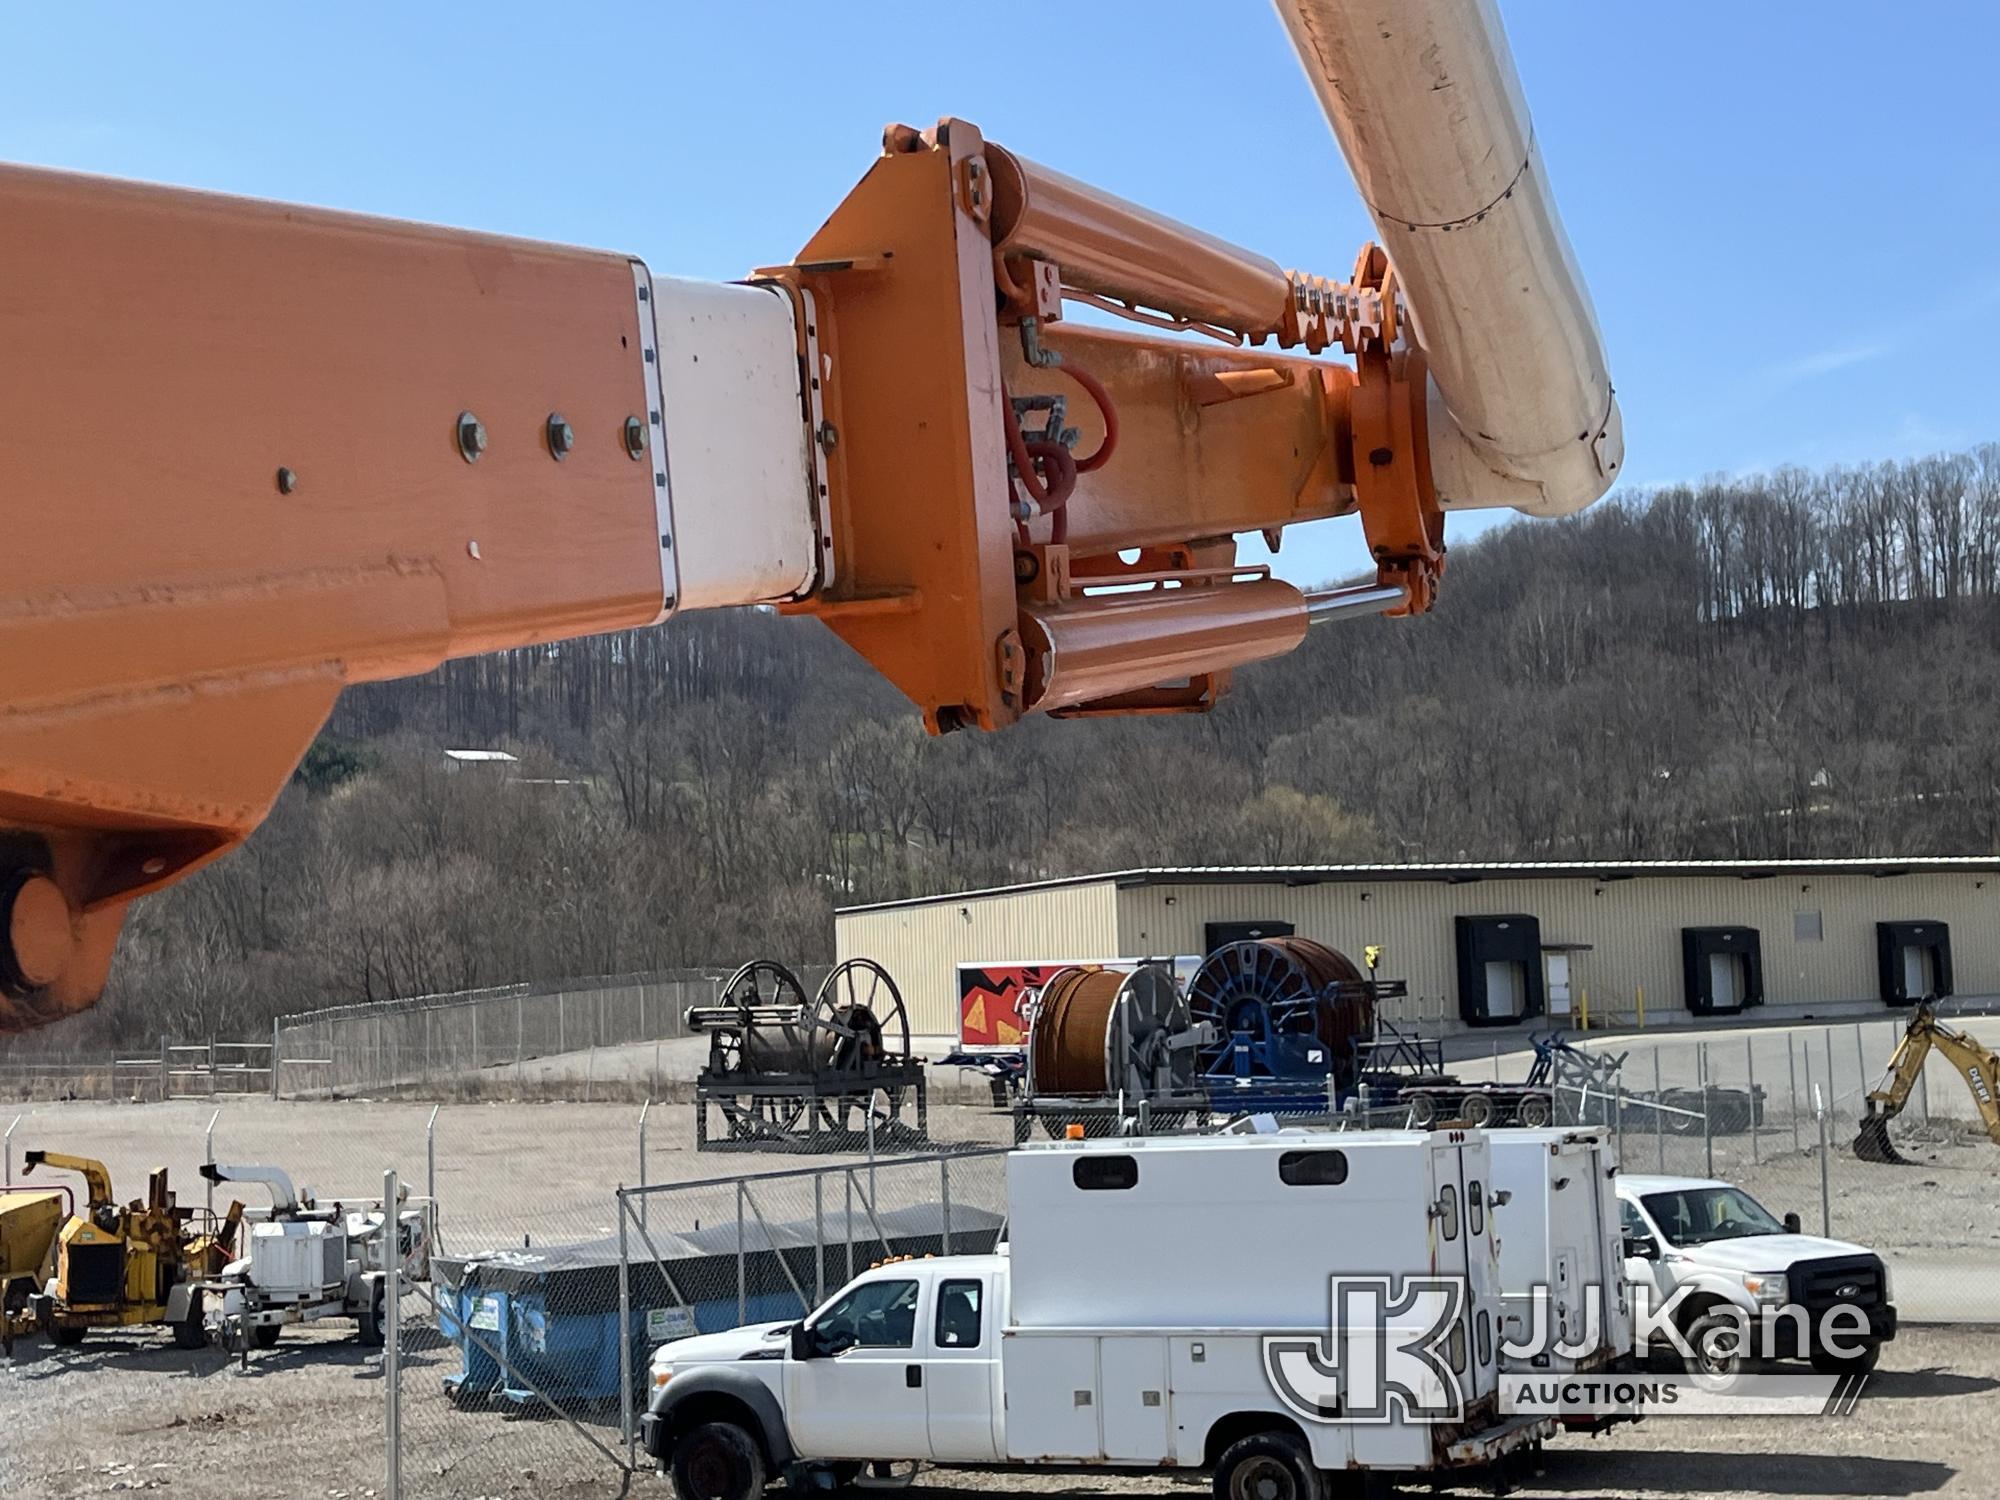 (Smock, PA) Altec LR760-E70, Over-Center Elevator Bucket mounted behind cab on 2013 Ford F750 Chippe